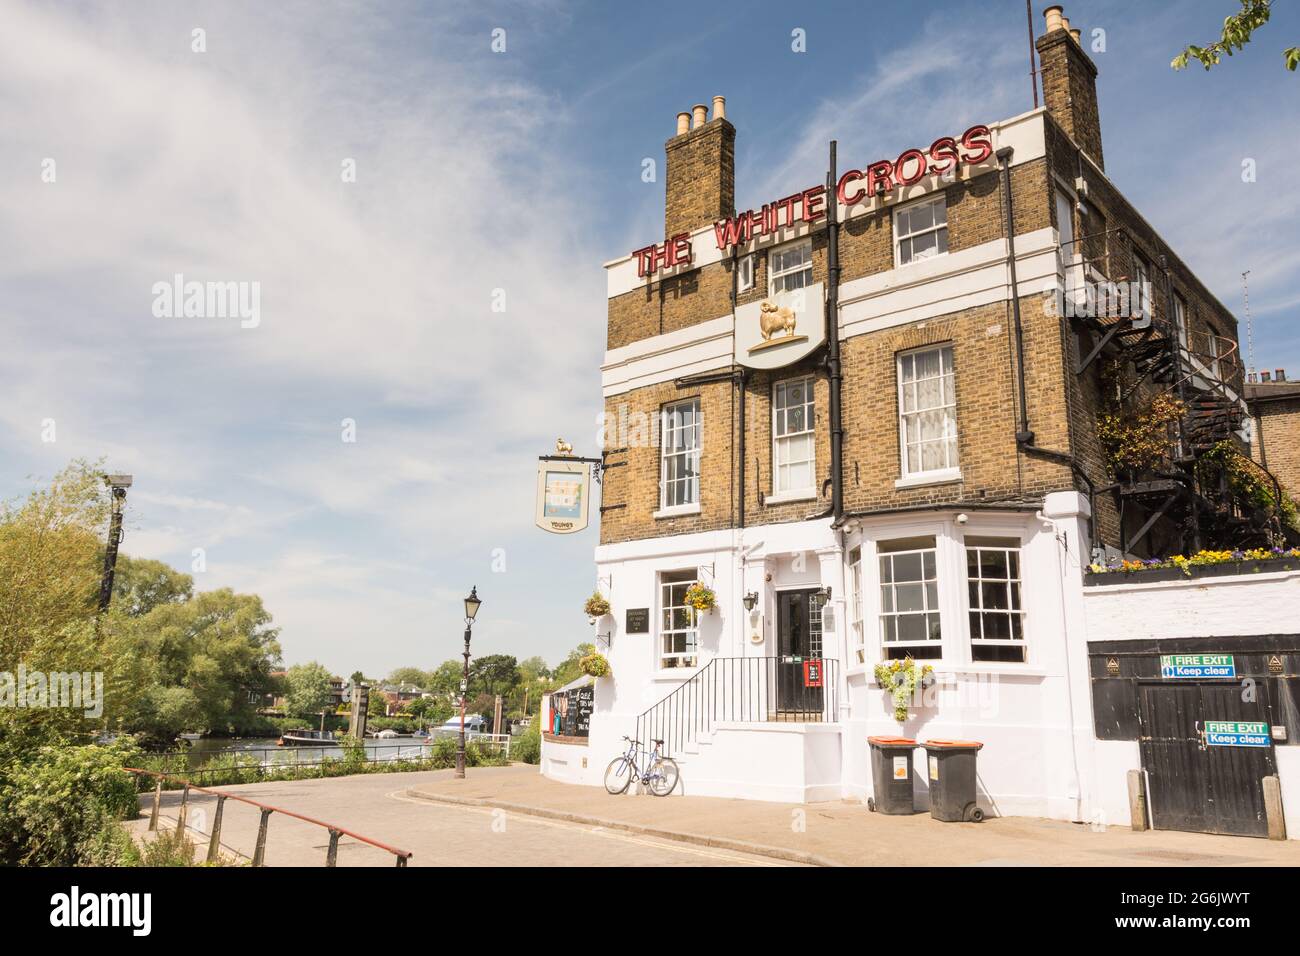 The White Cross Pub near the River Thames at Richmond Upon Thames, London, England, UK Stock Photo